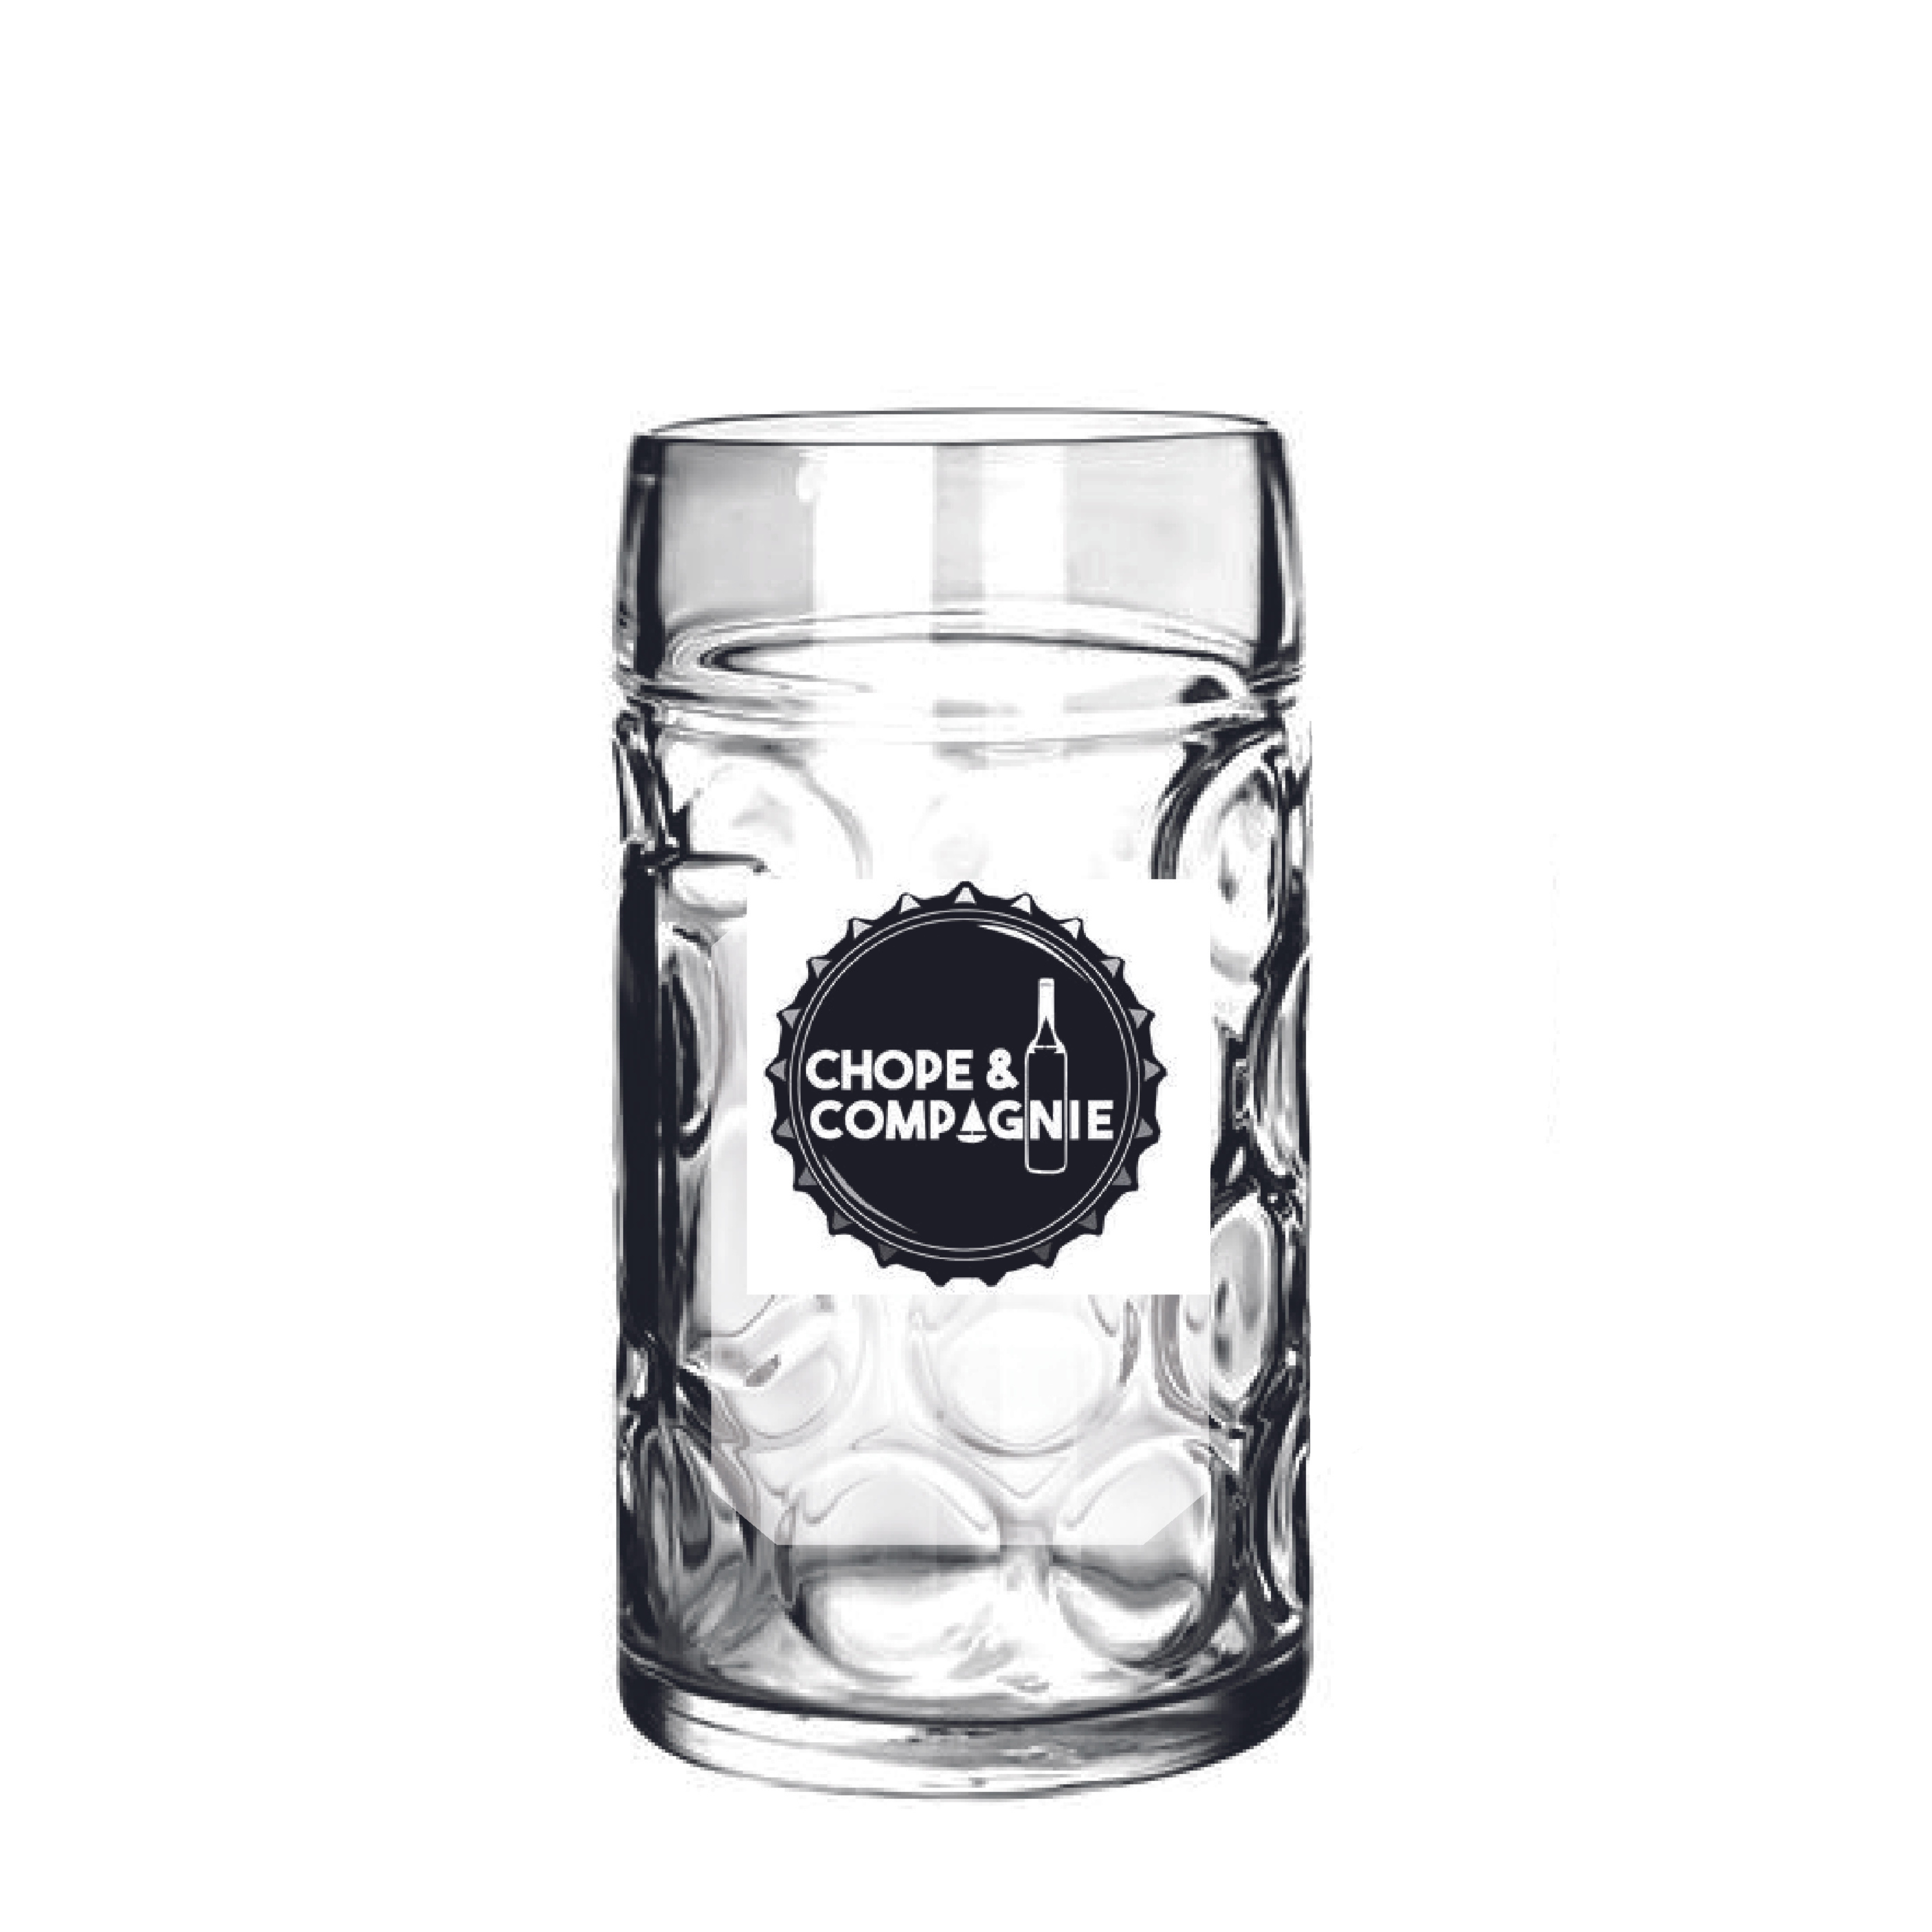 Personalised mug beer glass with graphic design "Chope & Compagnie"